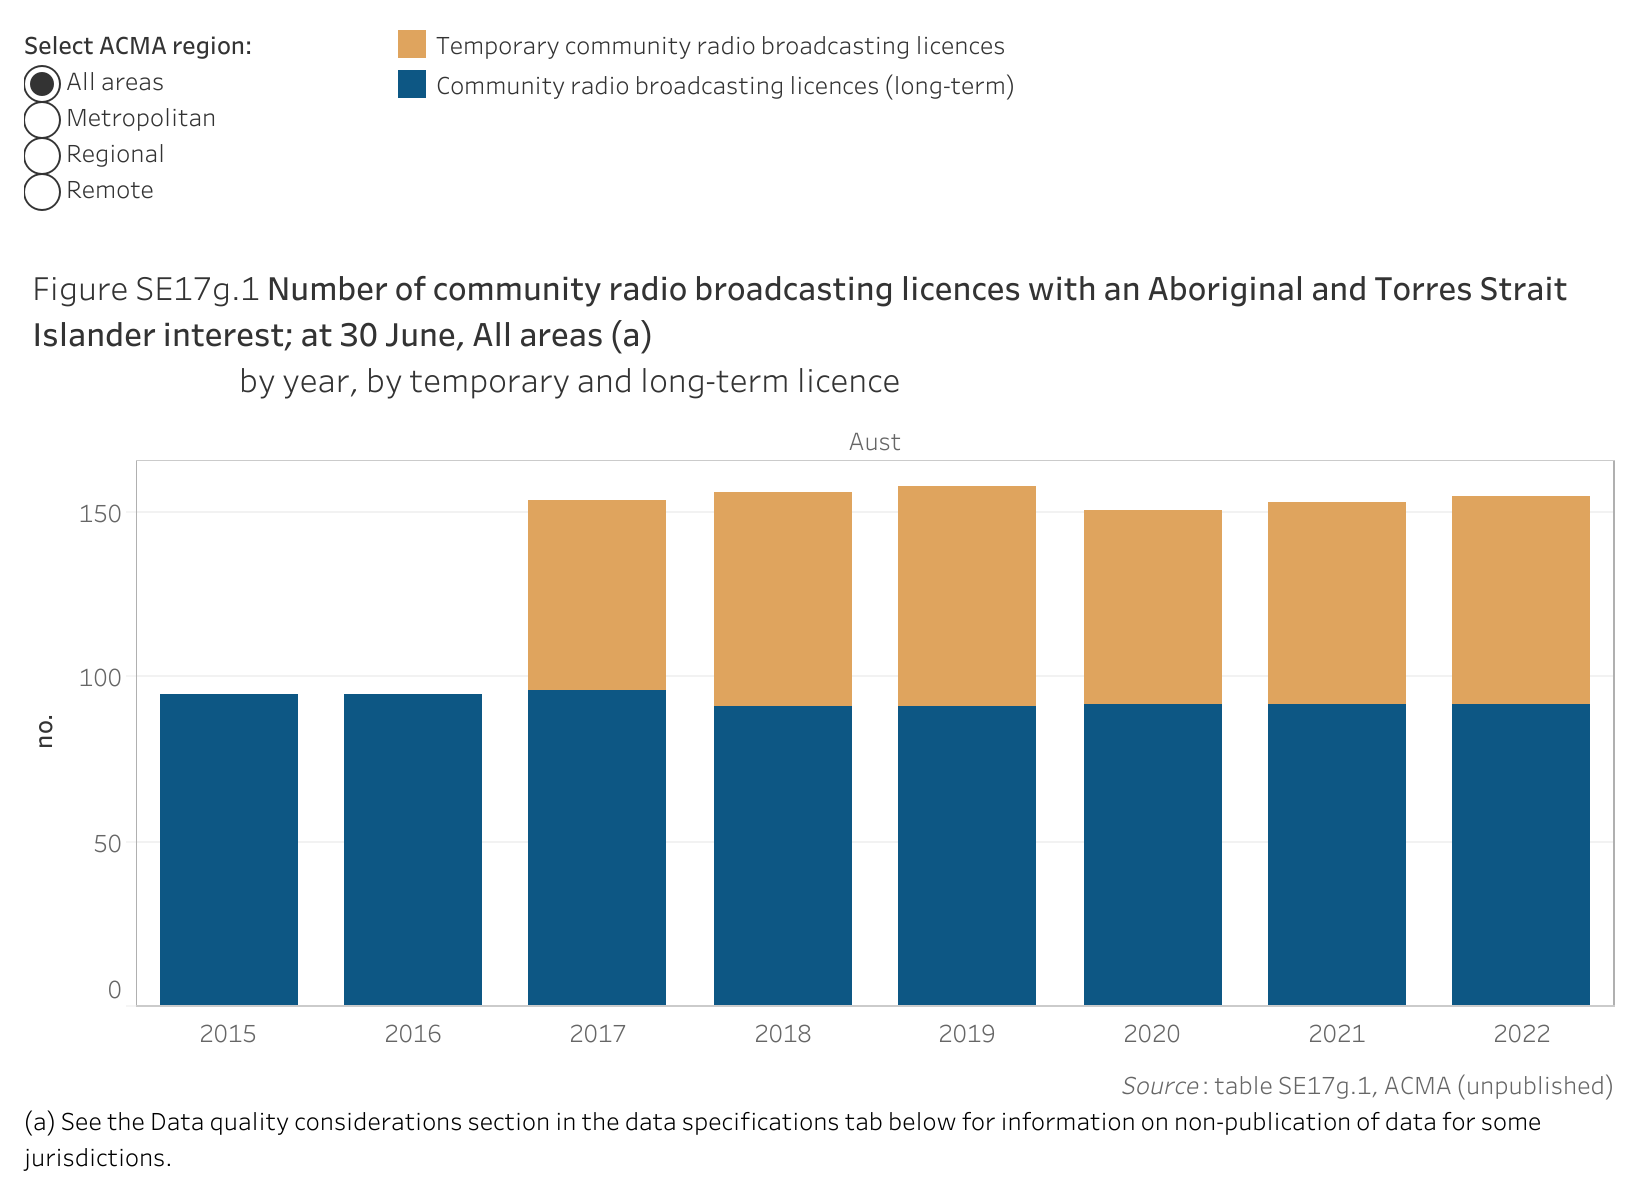 Figure SE17g.1 shows the number of community radio broadcasting licences with an Aboriginal and Torres Strait Islander interest; at 30 June, All areas, by year, by temporary and long-term licence. More details can be found within the text near this image.